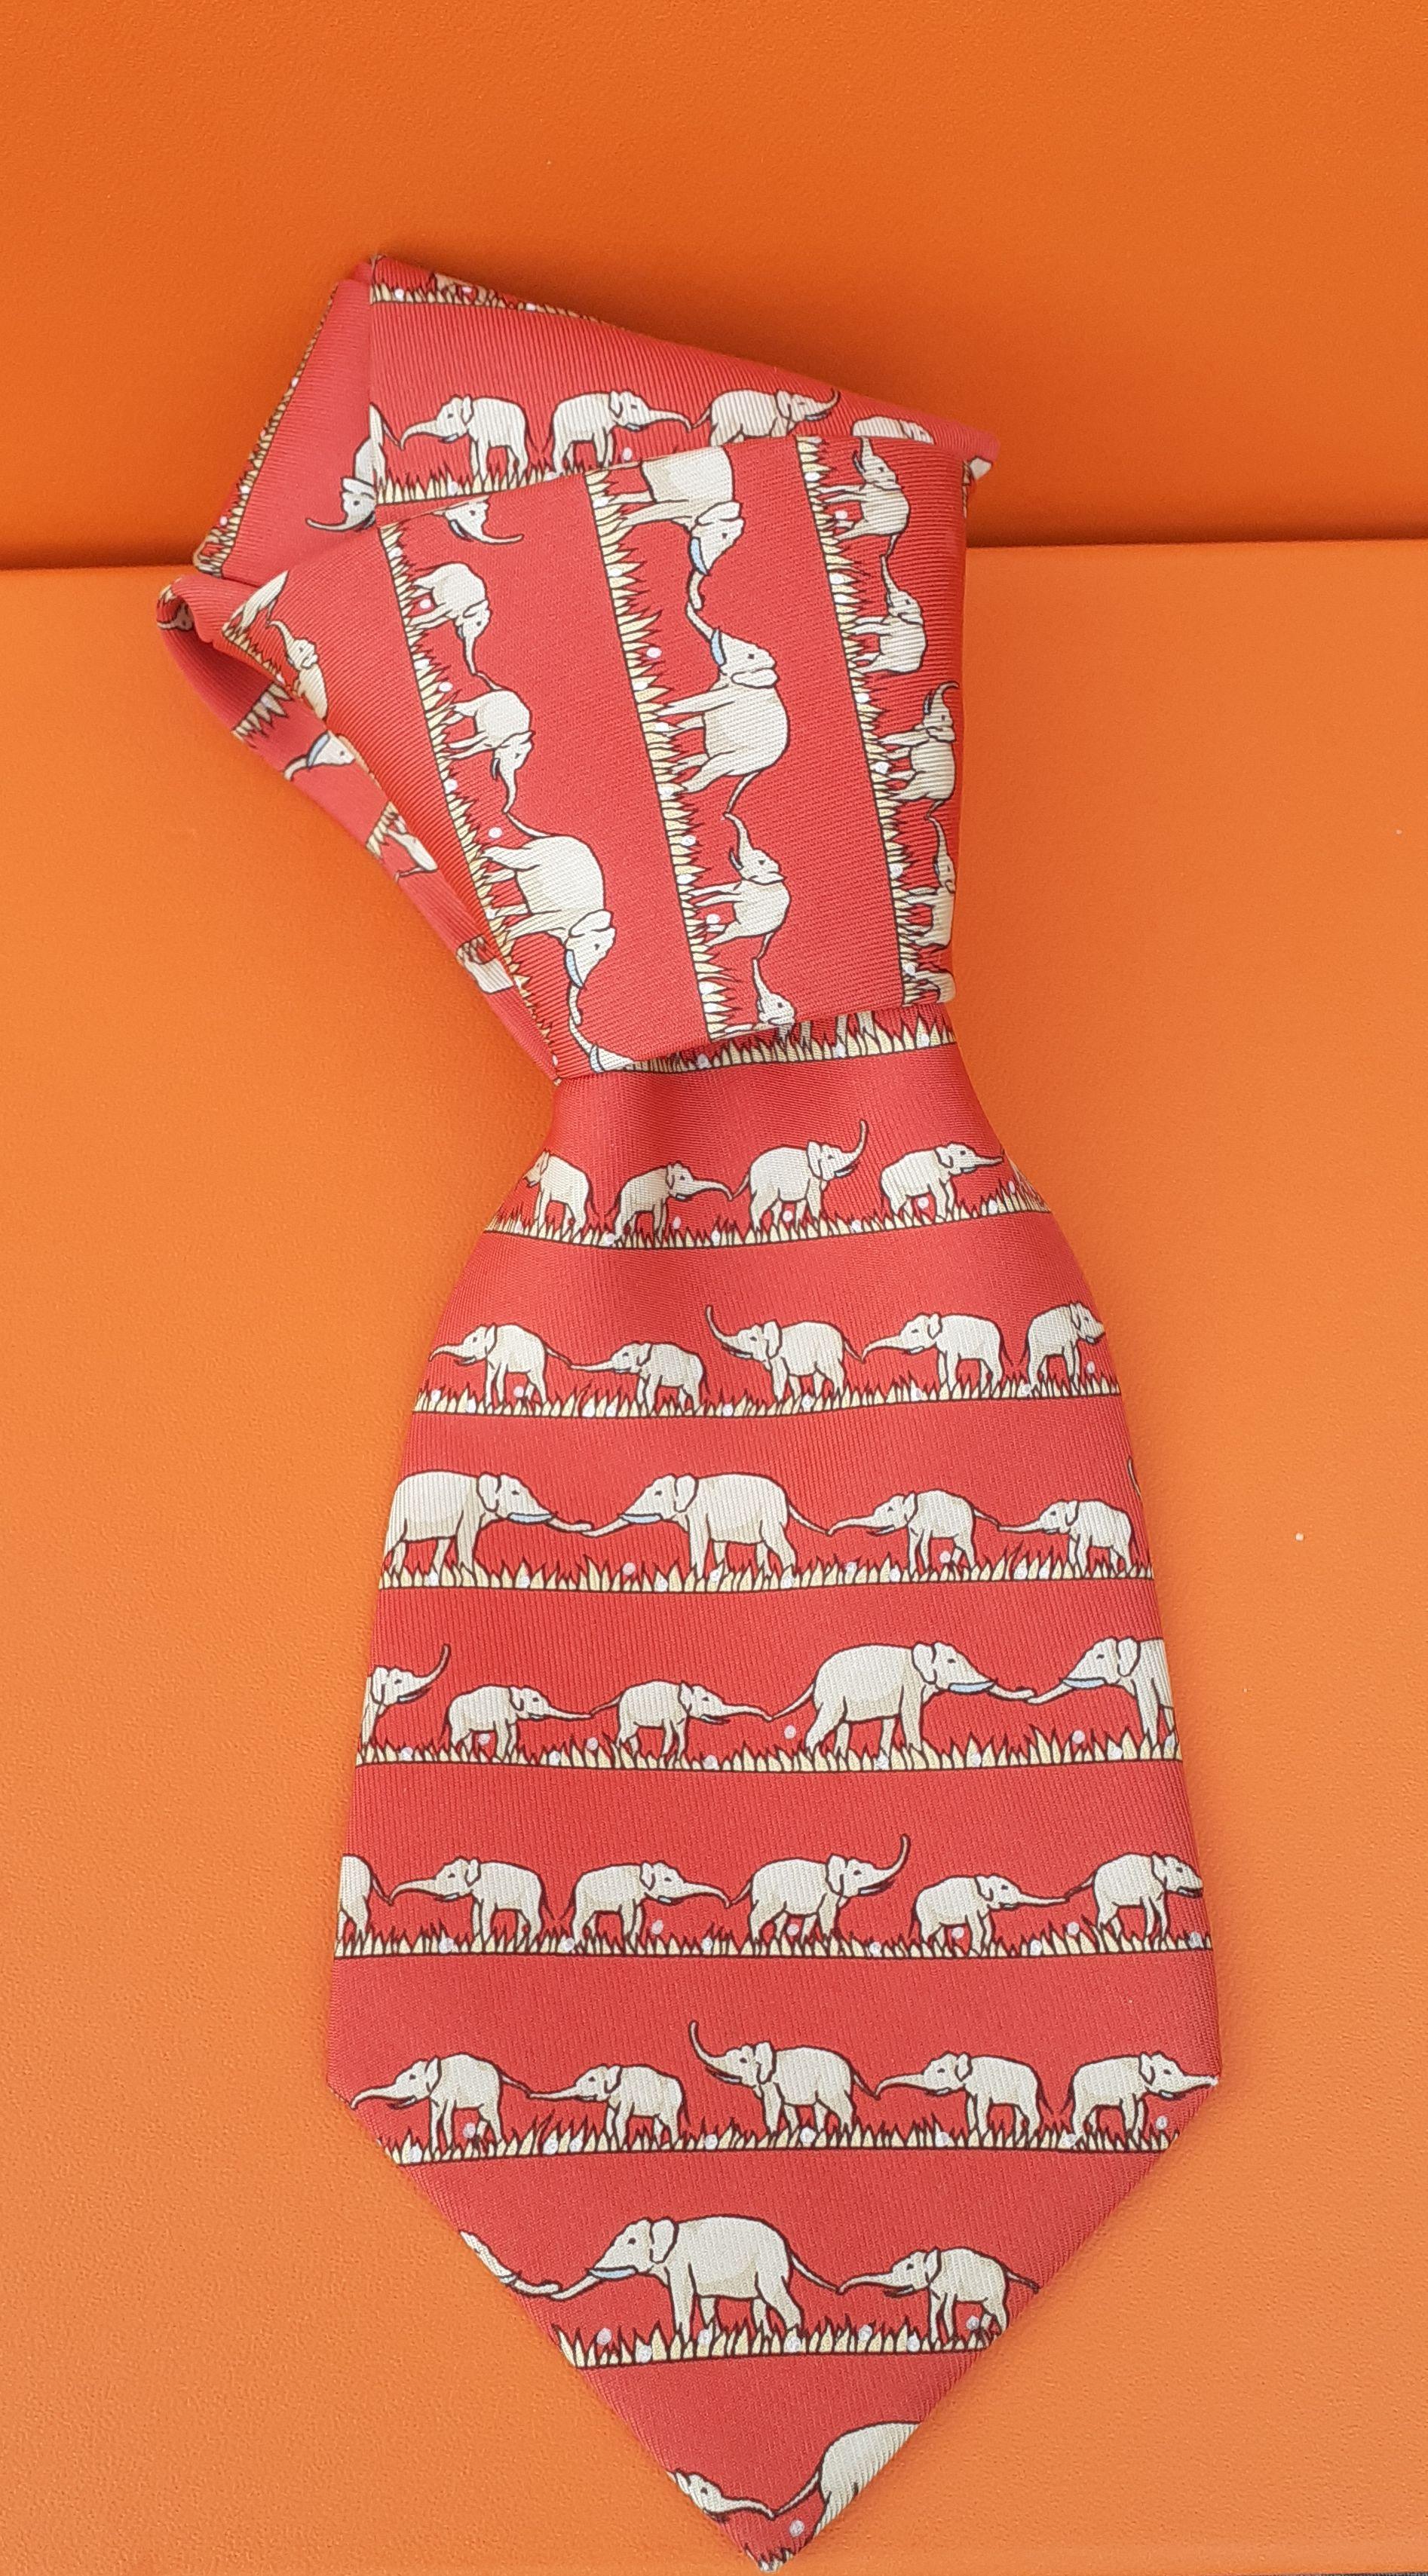 Beautiful Authentic Hermès Tie

Pattern: Elephants

Probably from 2005

Made in France

100% Silk

Colorways: Red background, Beige Elephants and polka dots, Pale Yellow Grass 

Lined with plain red silk

